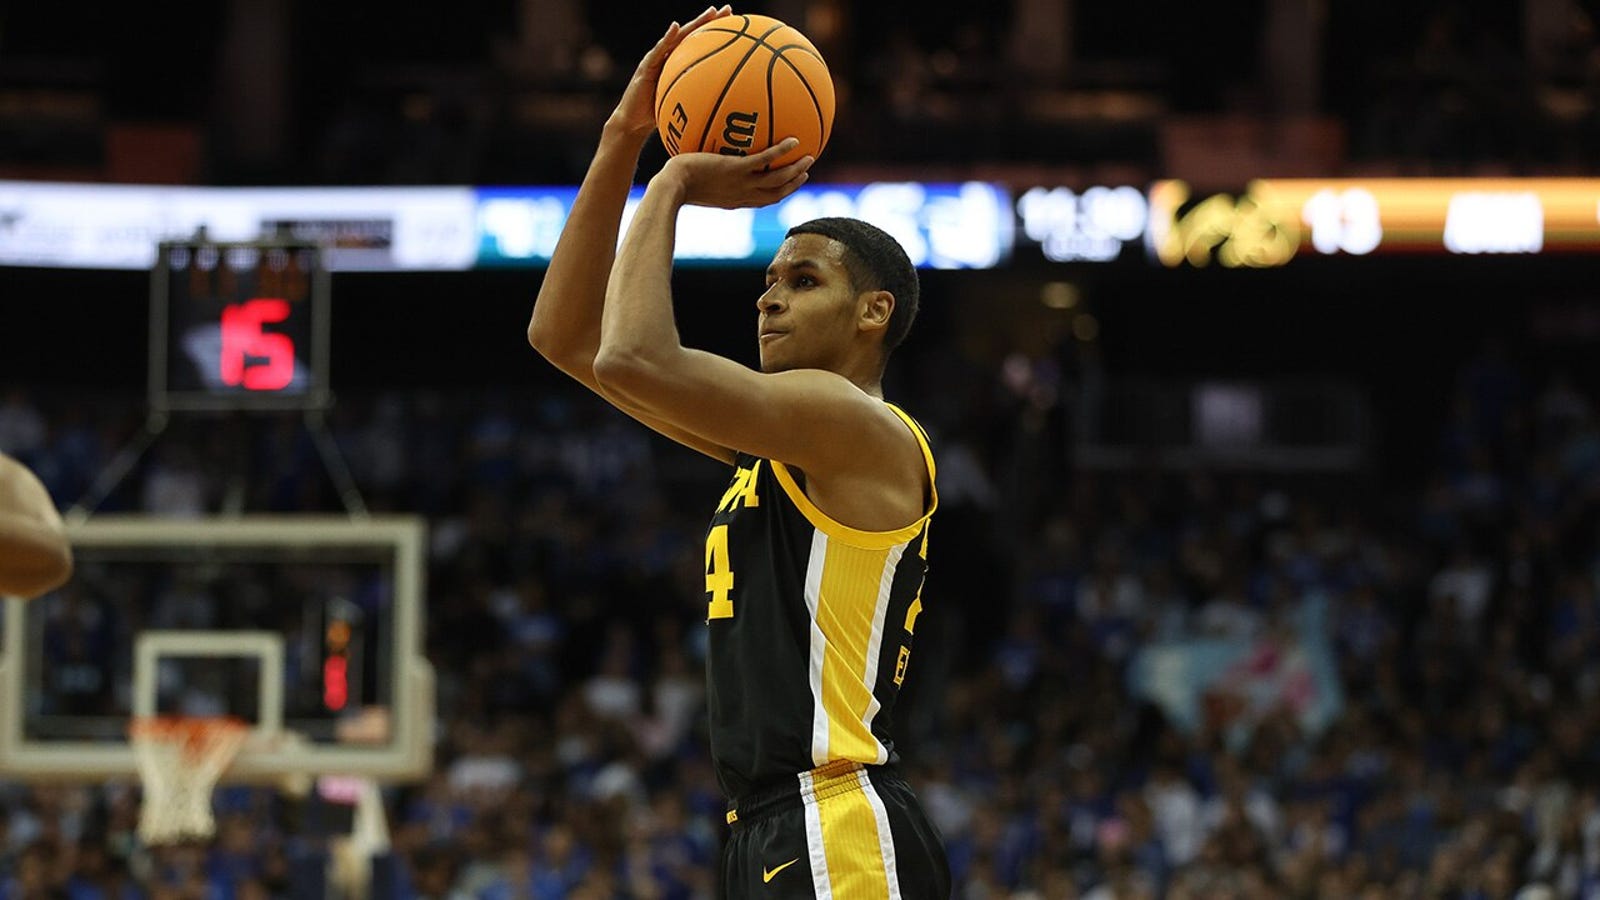 Iowa's Kris Murray is too much for Seton Hall